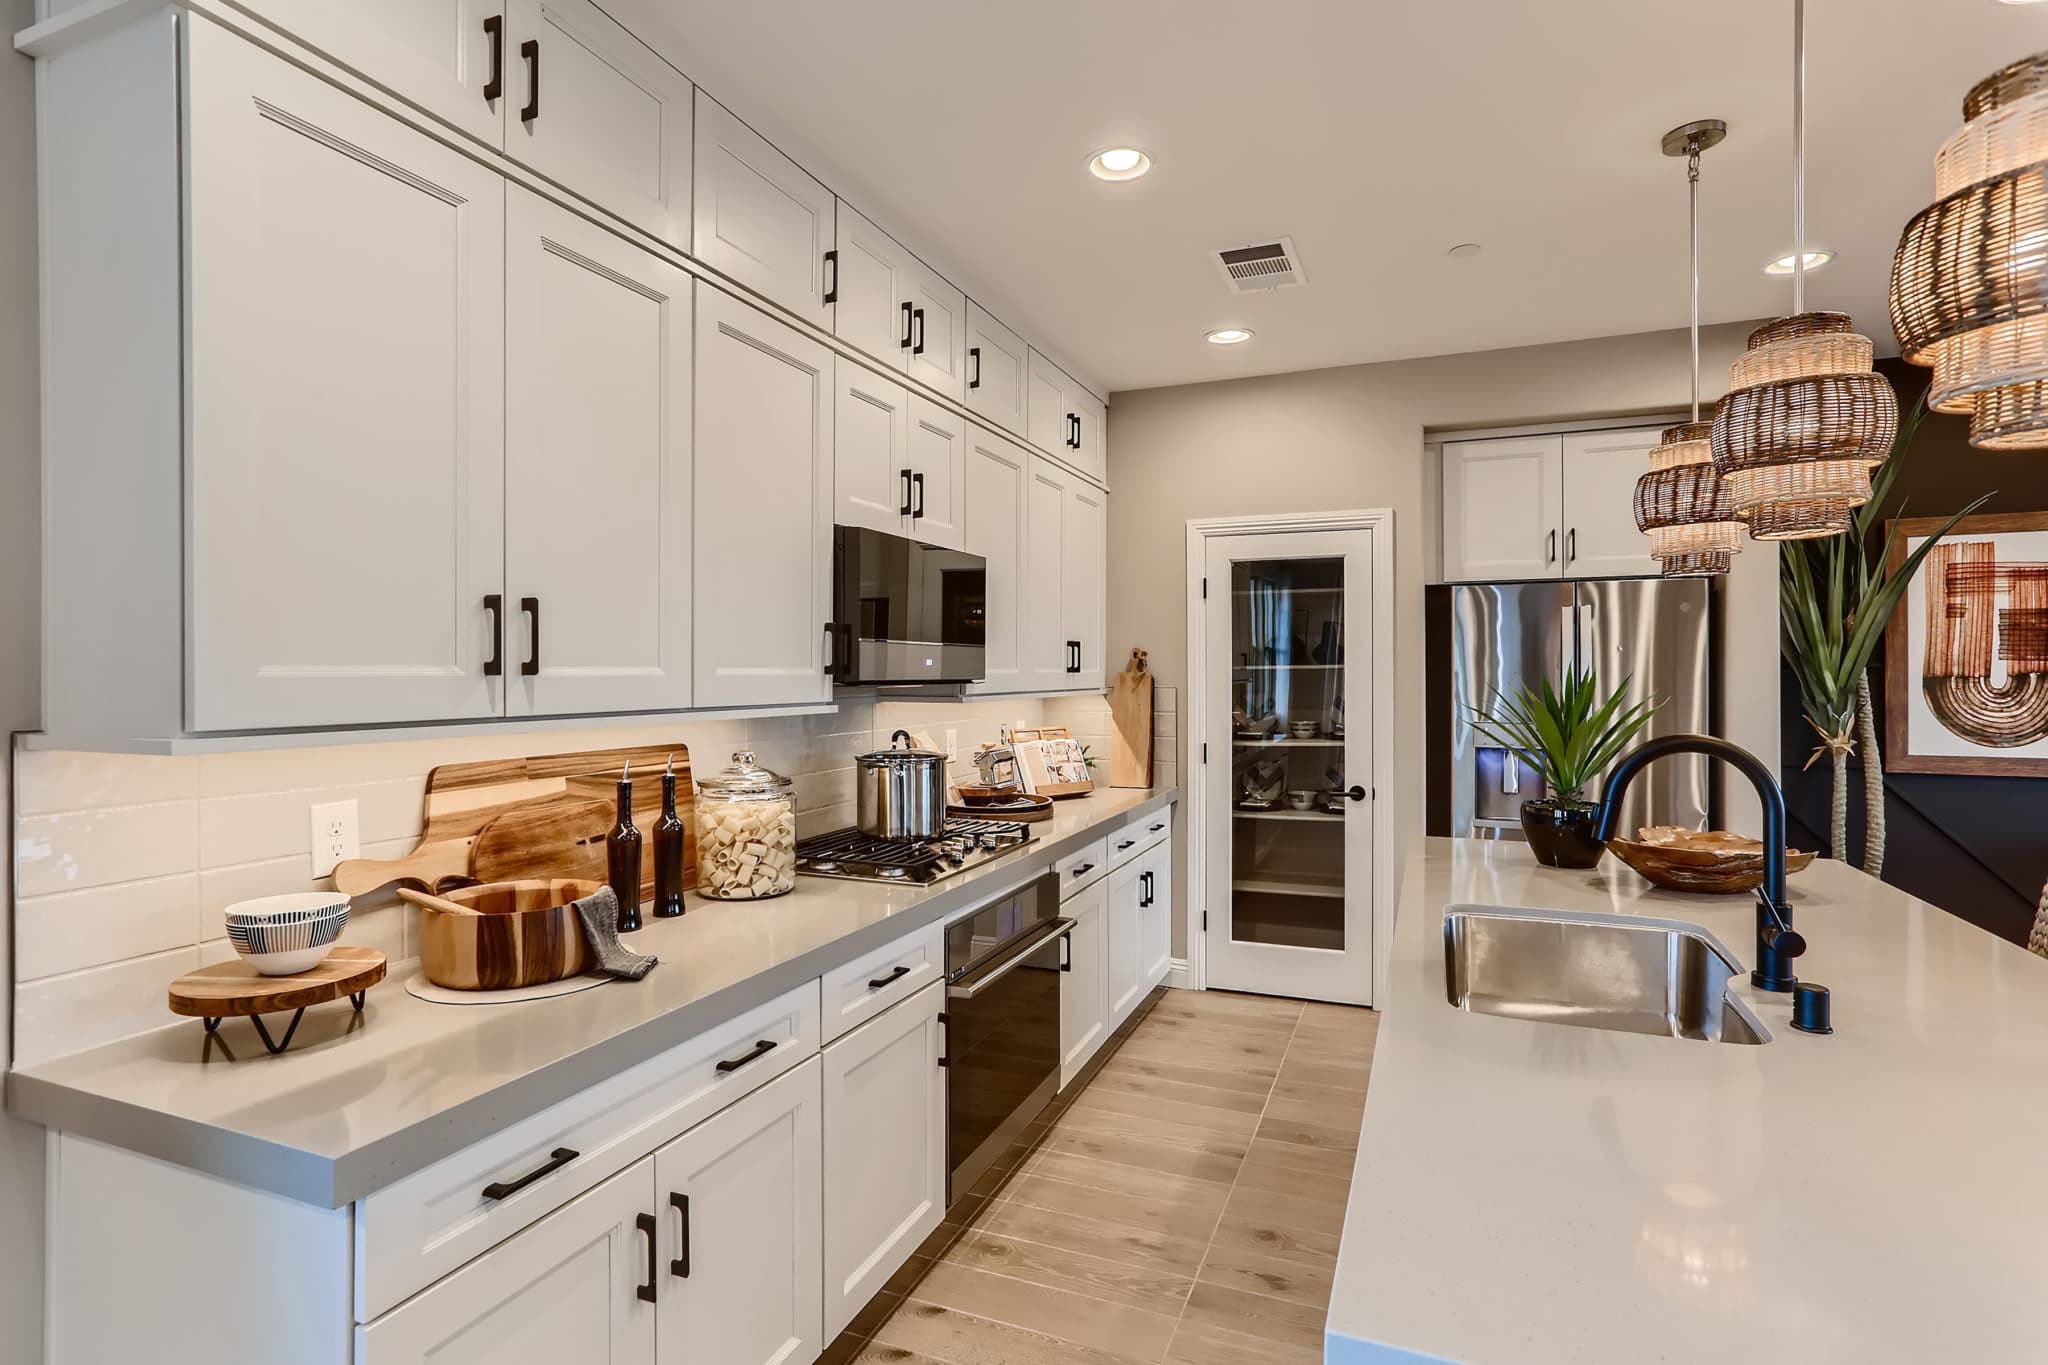 Kitchen of Sapphire Plan 5 at Obsidian by Woodside